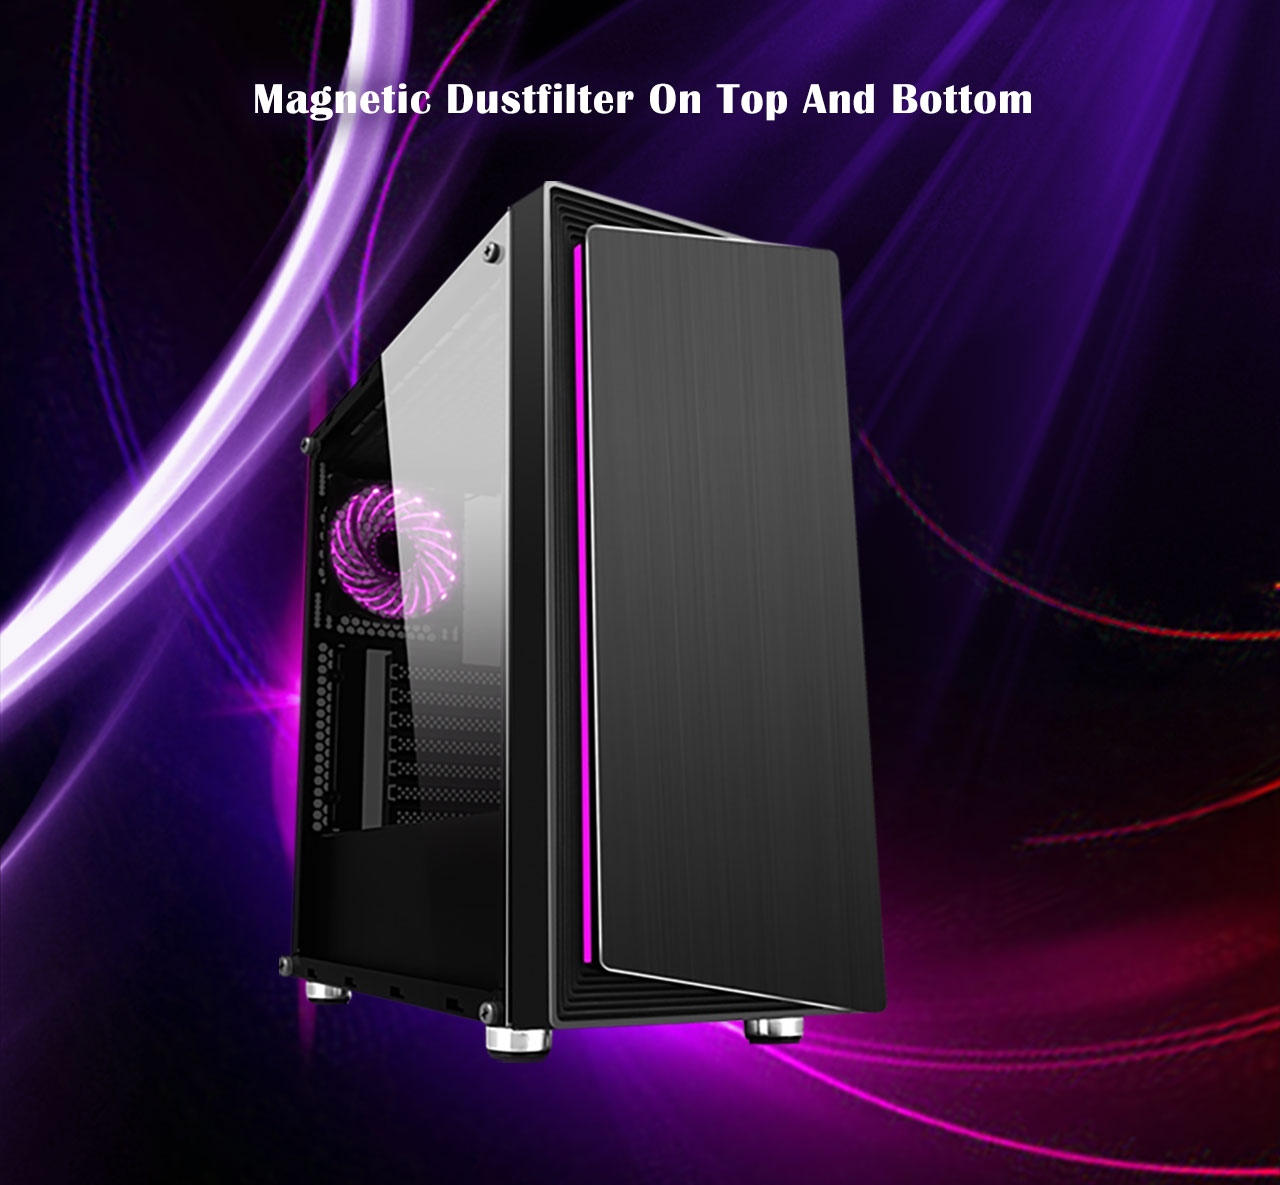 The DIYPC DIY-Line-RGB Case facing to the right with purple lighting and text above it that reads: Magnetic Dust Filter on top and bottom